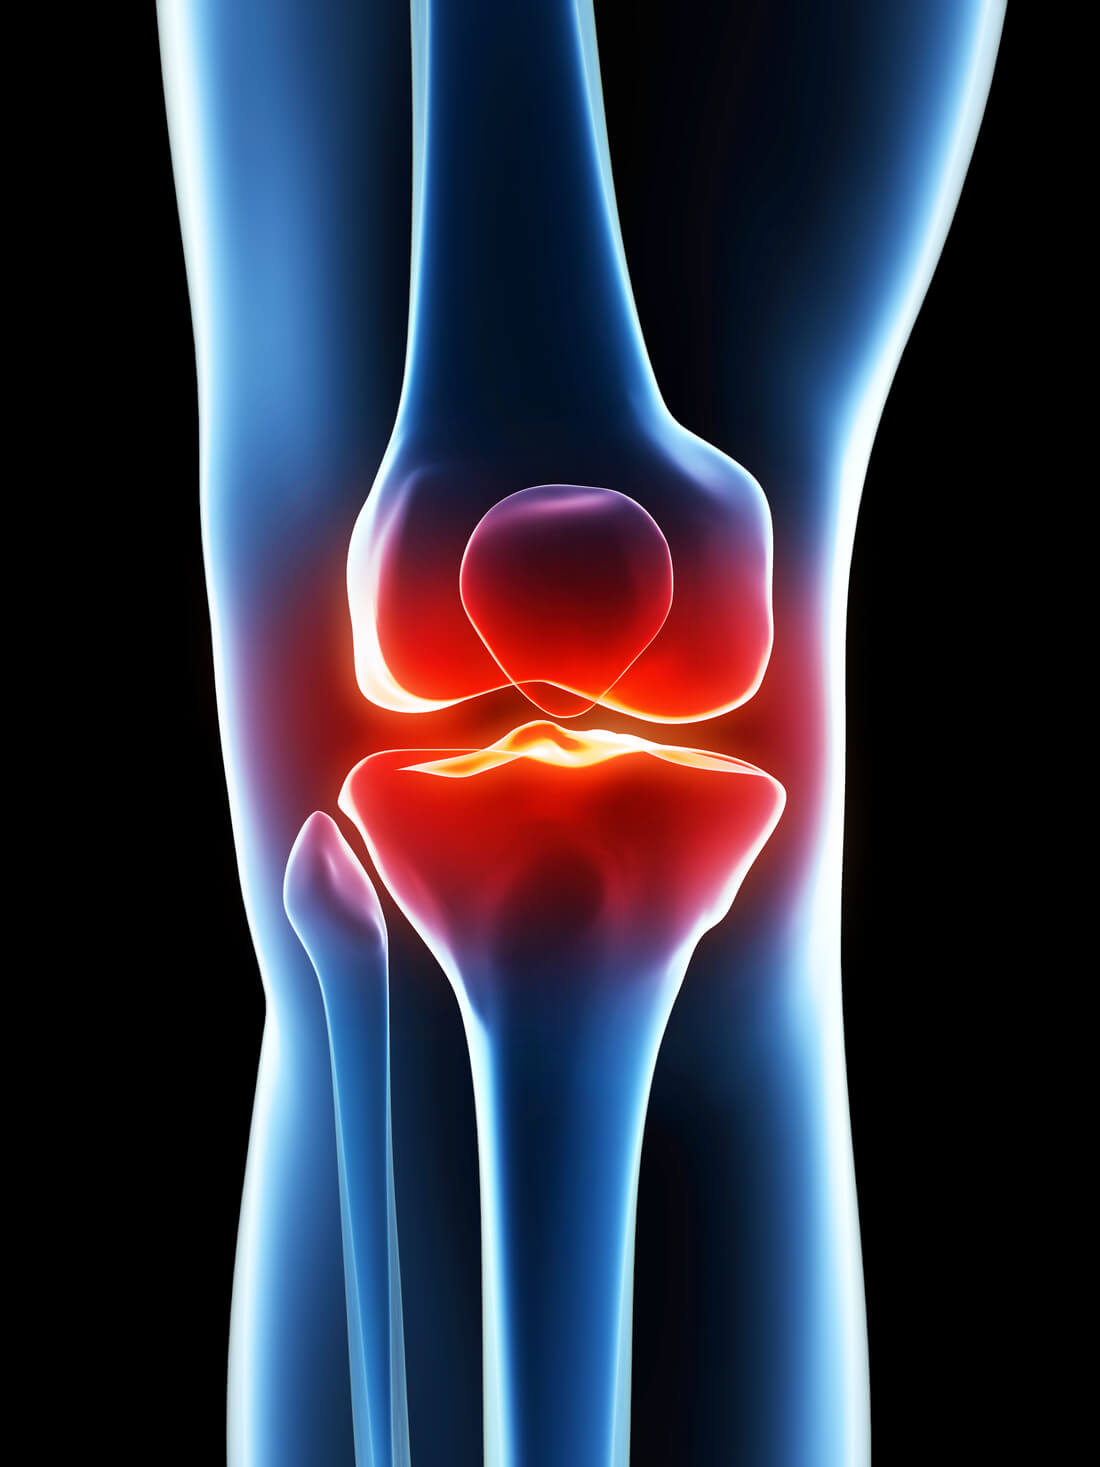 Knee Pain And How To Relieve It Effectively Acc